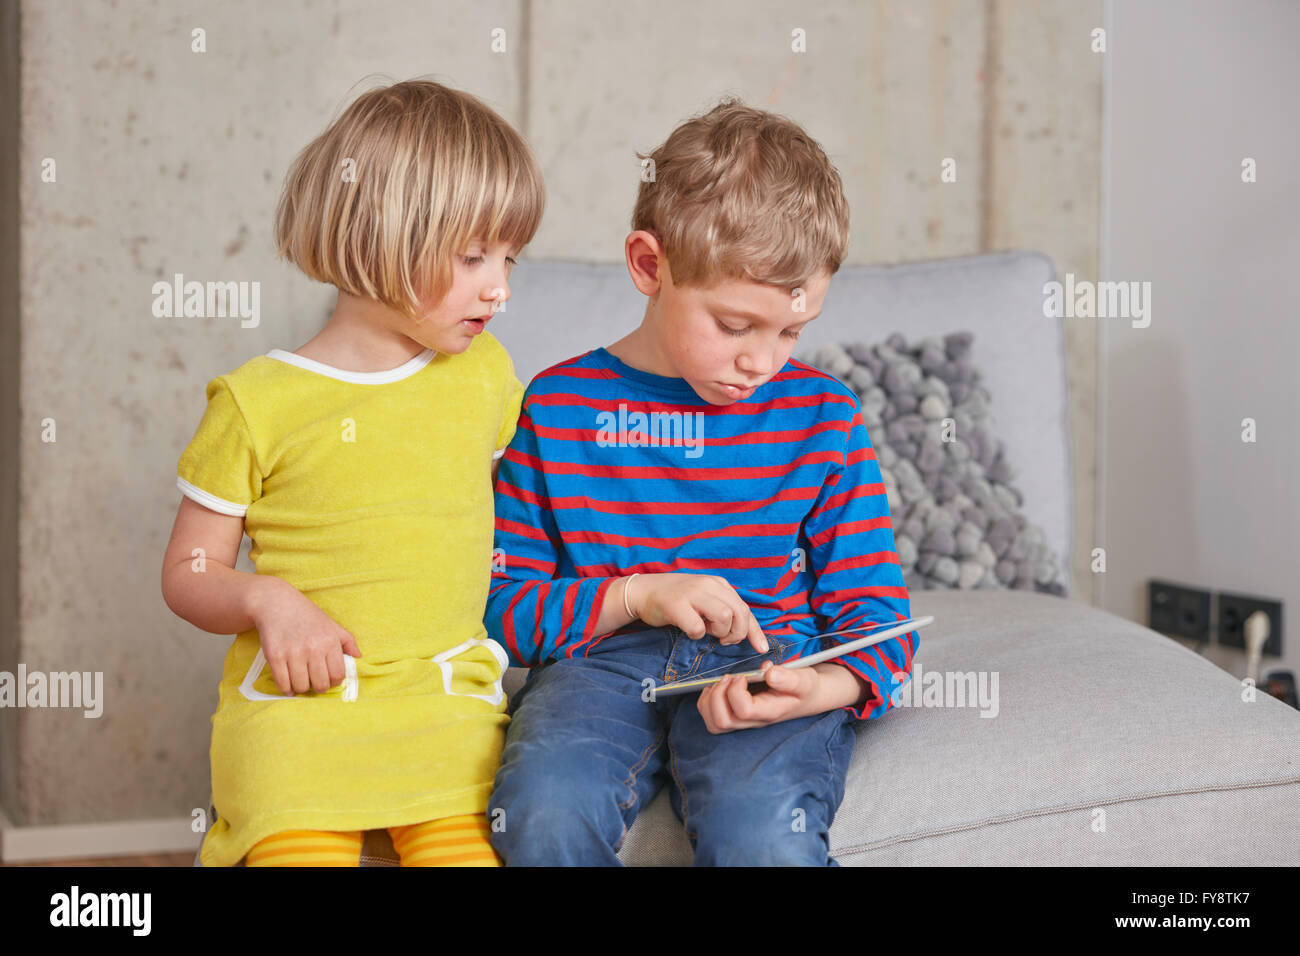 Brother and sister using digital tablet Stock Photo